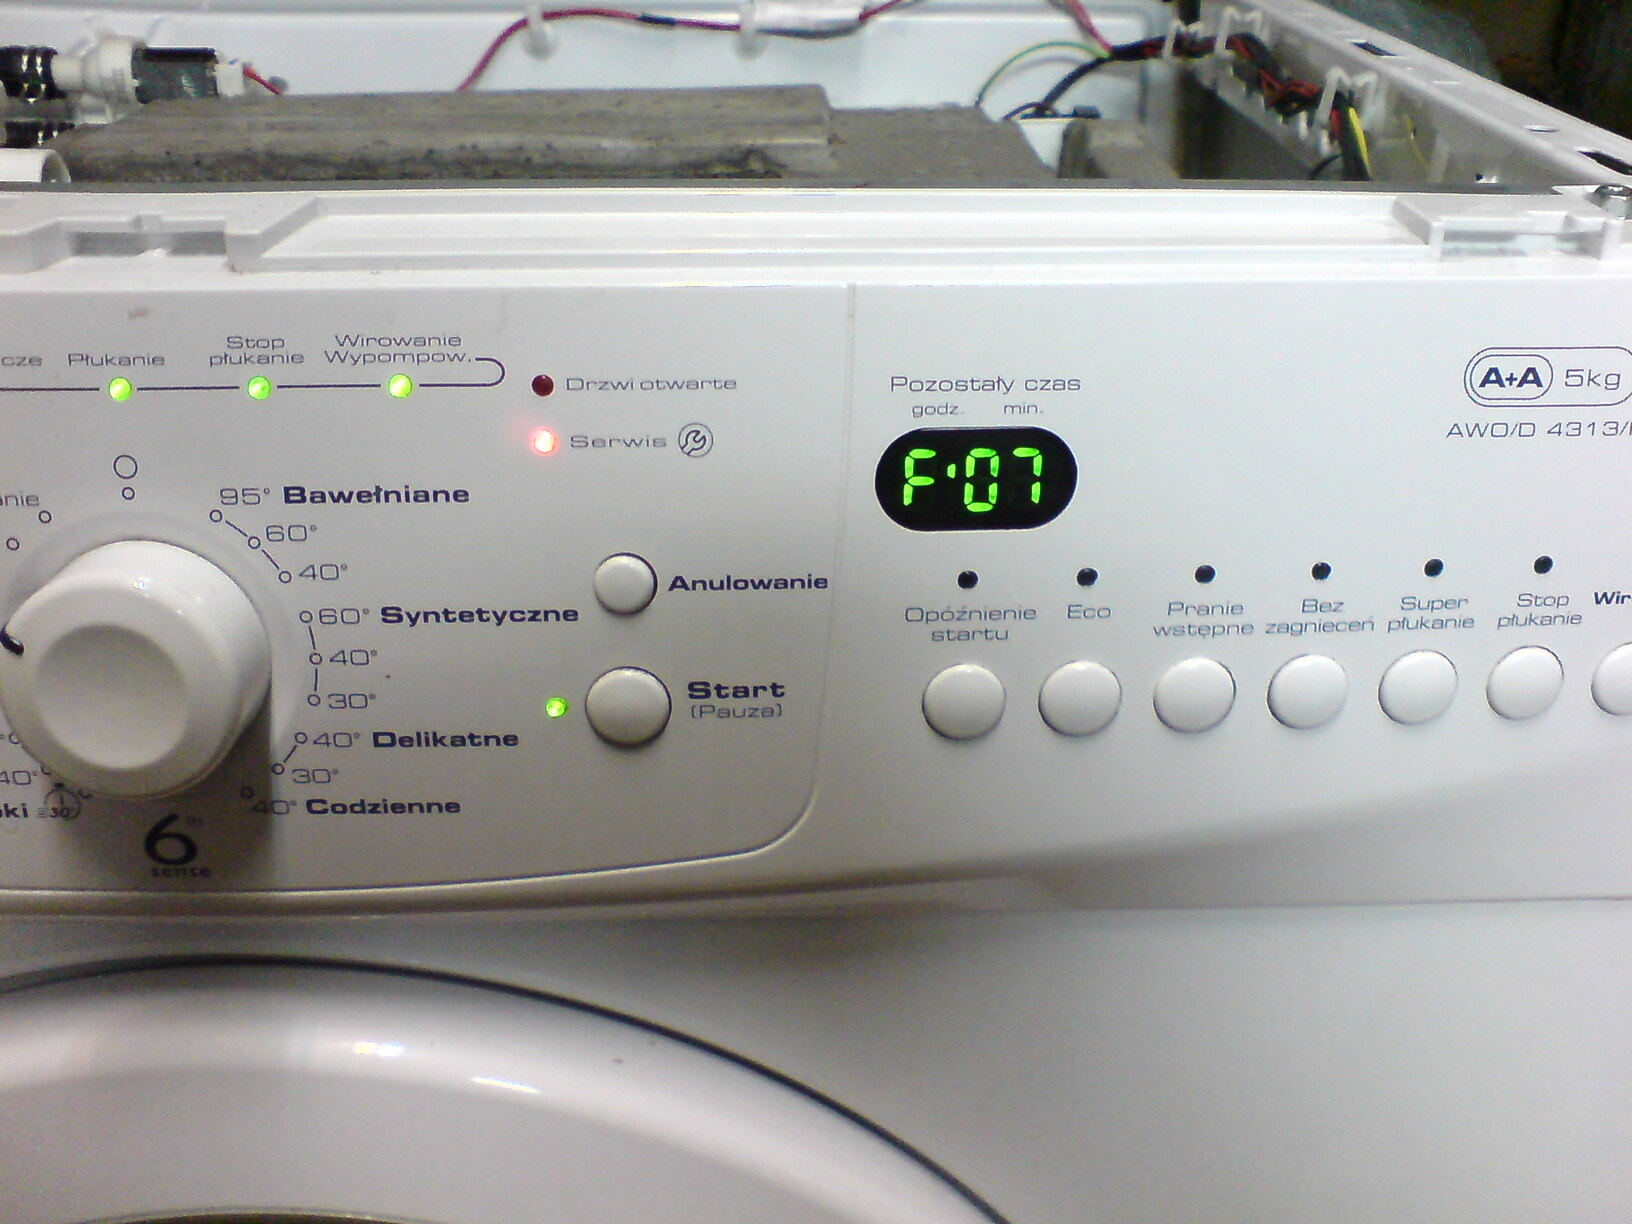 How To Fix The Error Code F07 For Whirlpool Washer